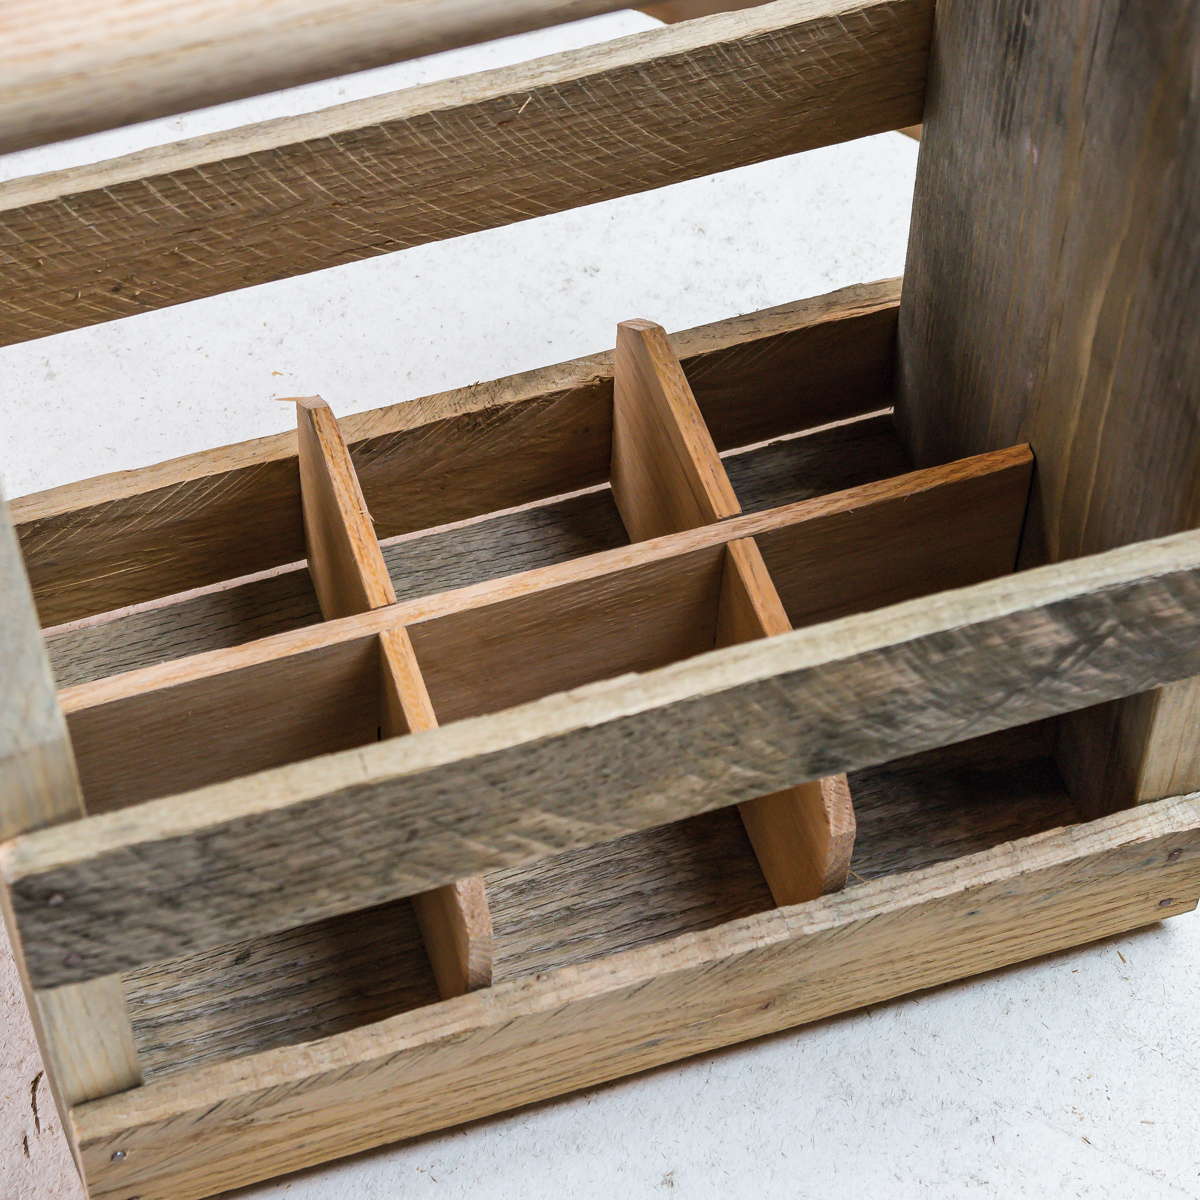 How to Build a Wooden 6-Pack Holder - American Homebrewers Association